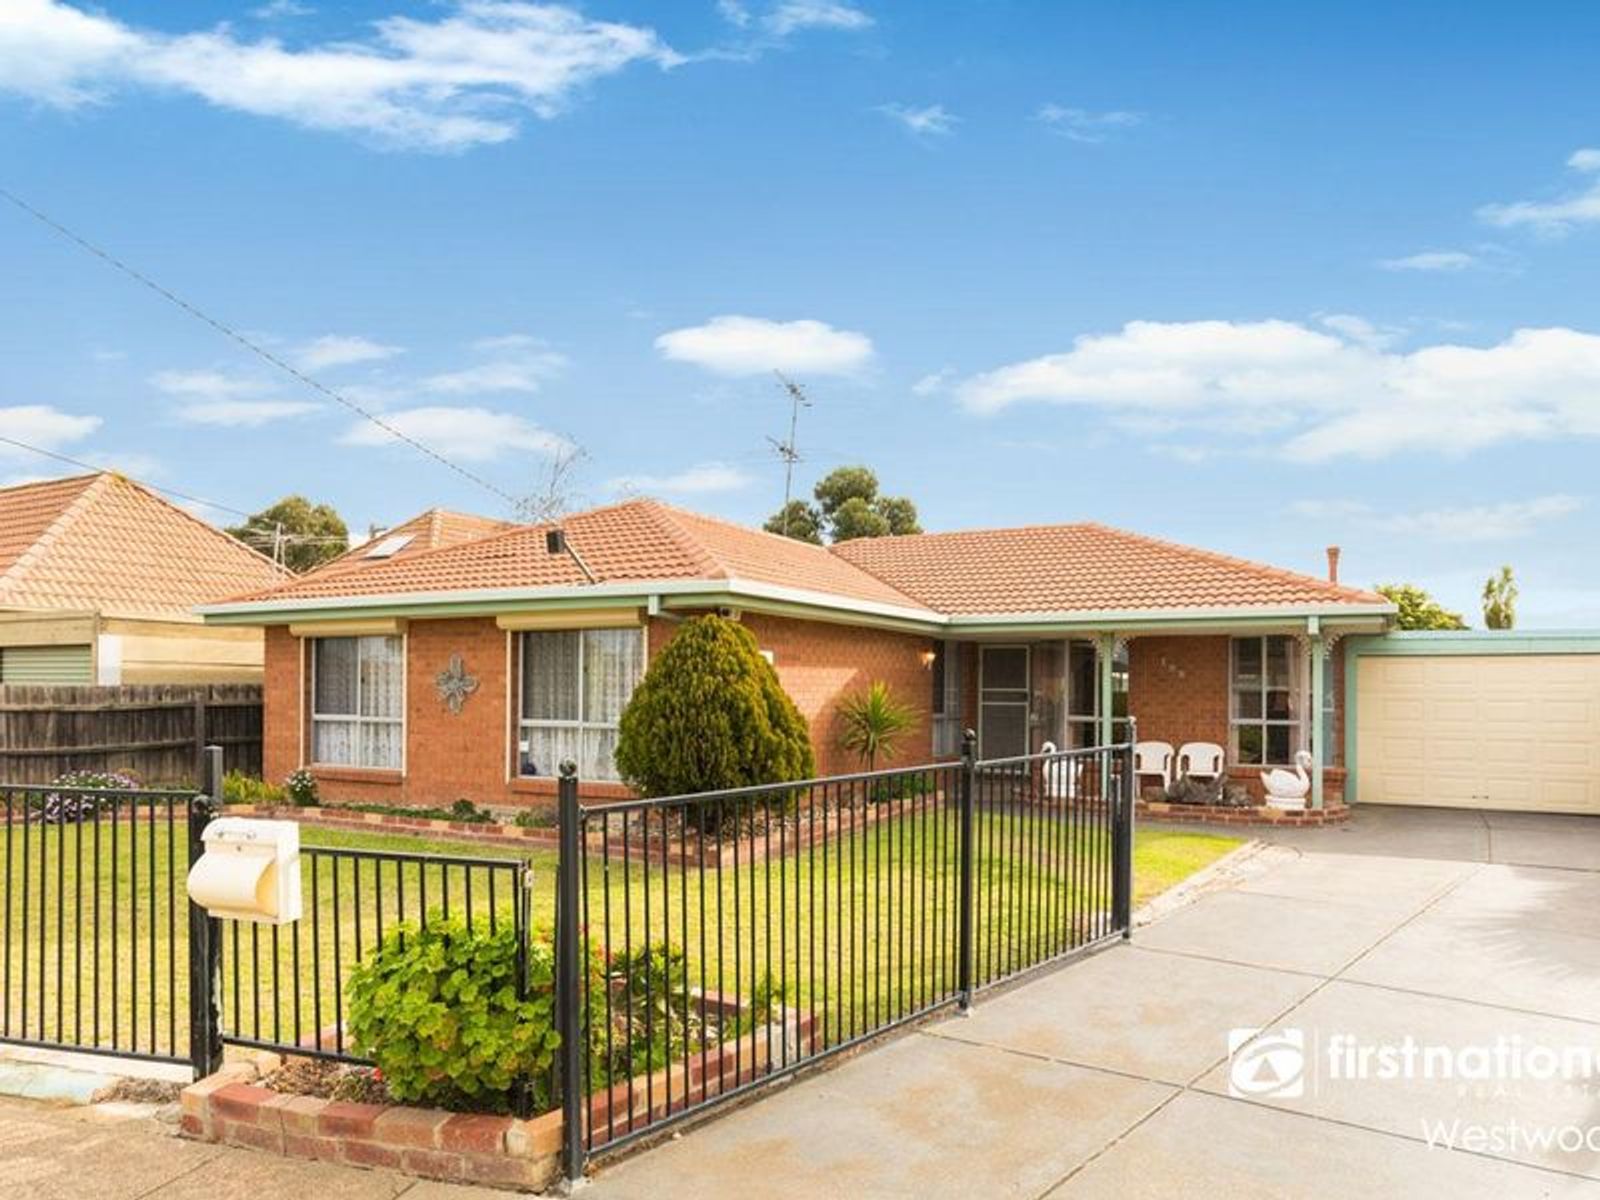 155 Mossfiel Drive, Hoppers Crossing, VIC 3029